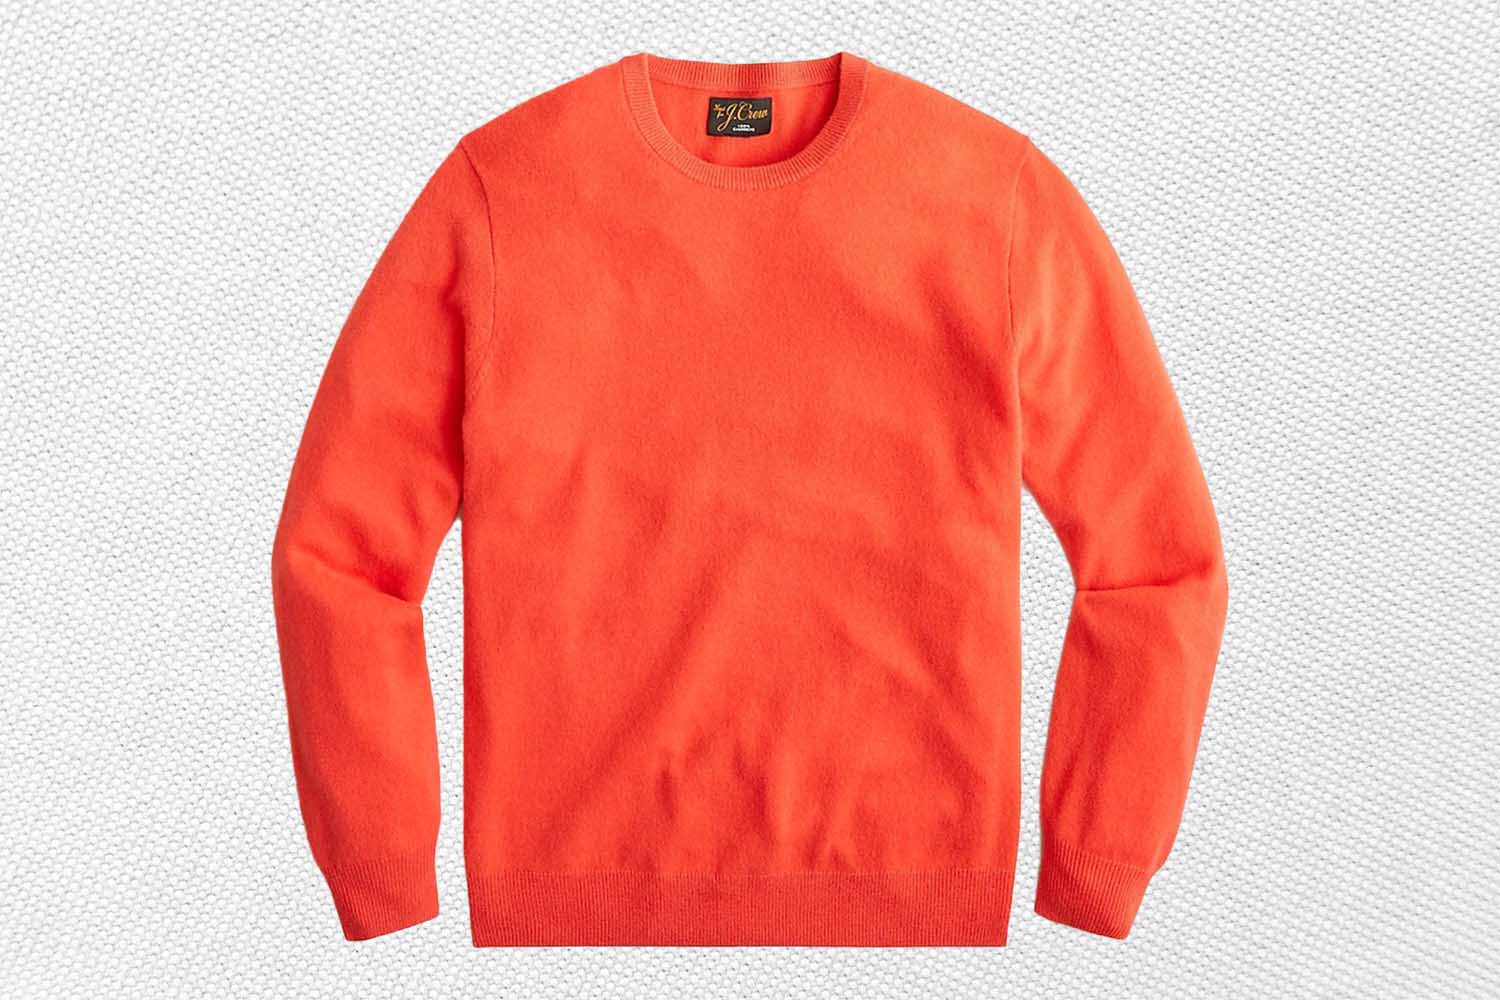 an orange cashmere sweater  from J.Crew on a textured white background